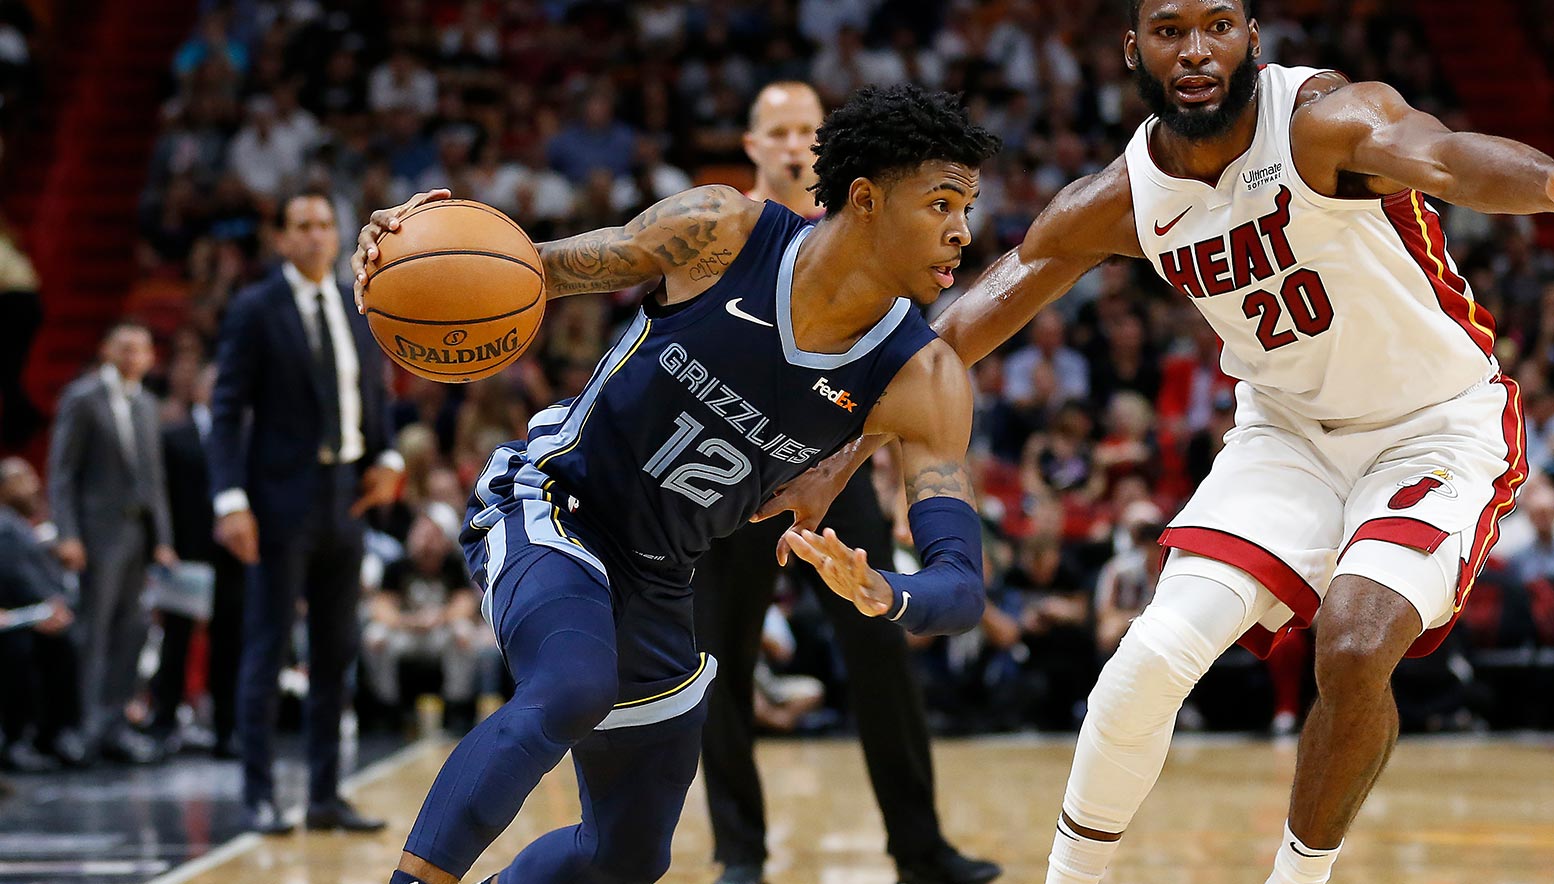 Ja Morant #12 of the Memphis Grizzlies drives to the basket against Justise Winslow #20 of the Miami Heat